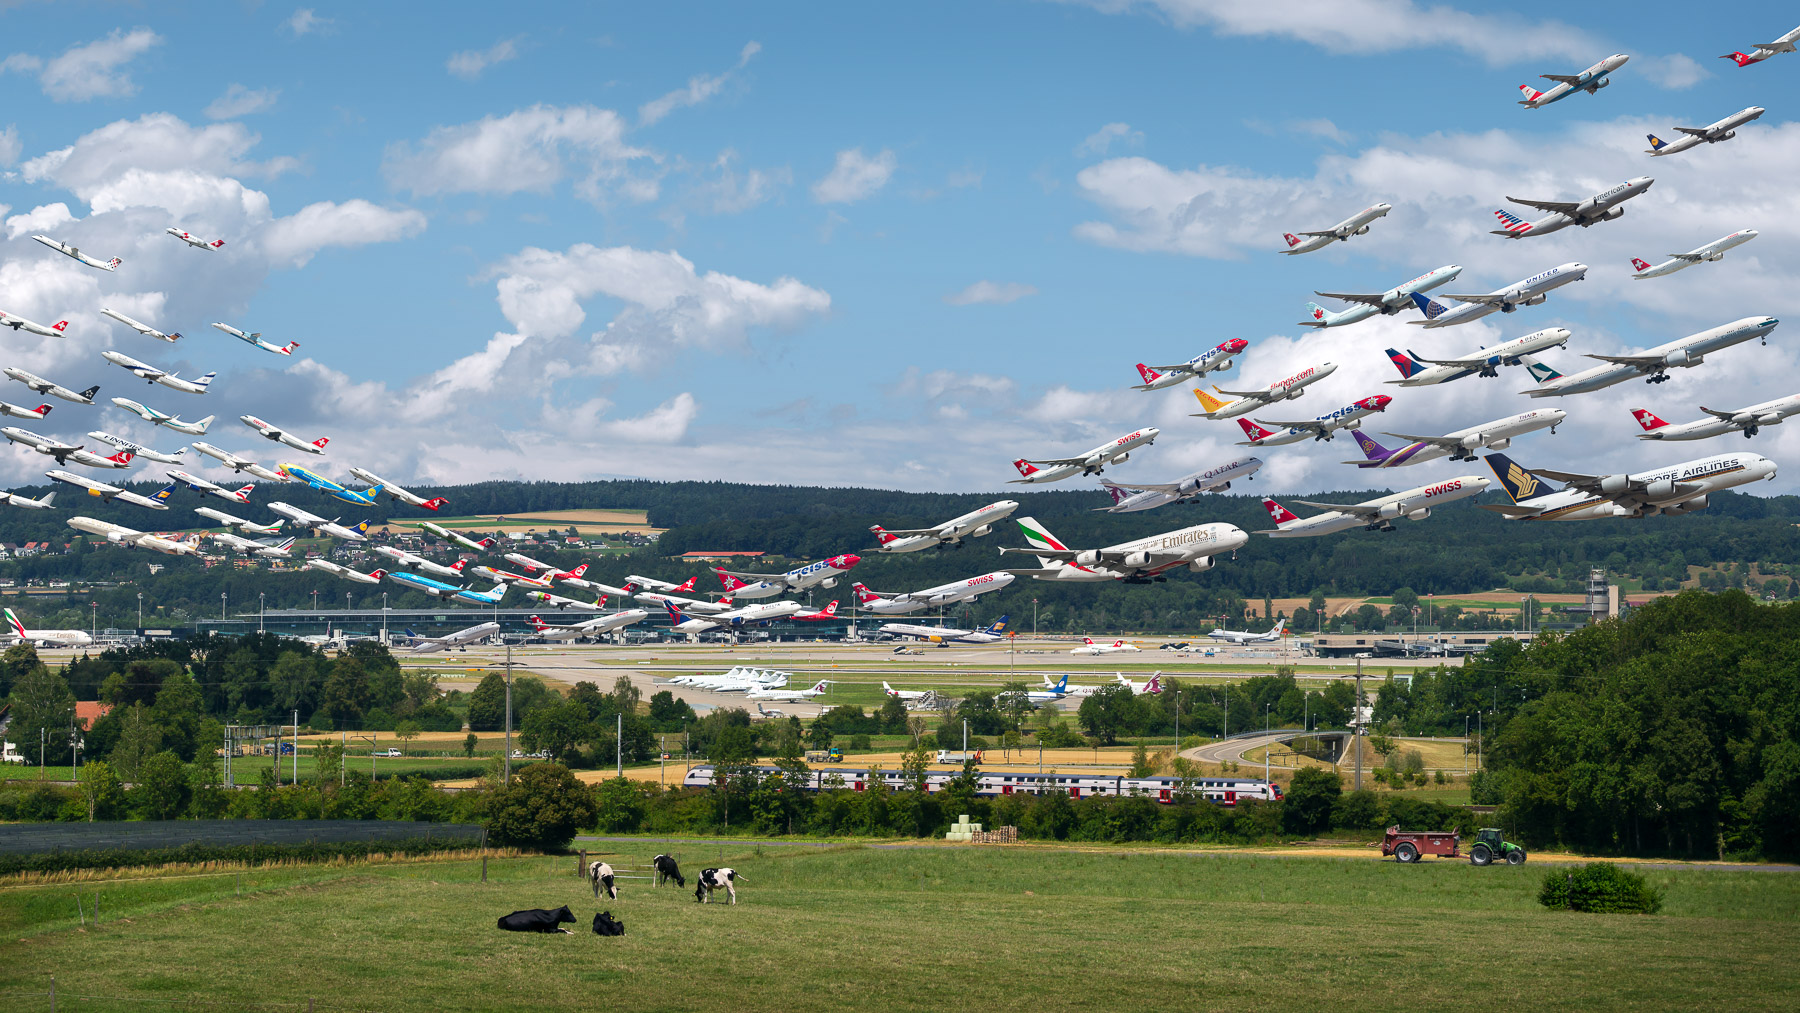 Mike Kelley's 'Airportraits' Are the Single Most Impressive Commercial Airline Photos We've Ever Seen